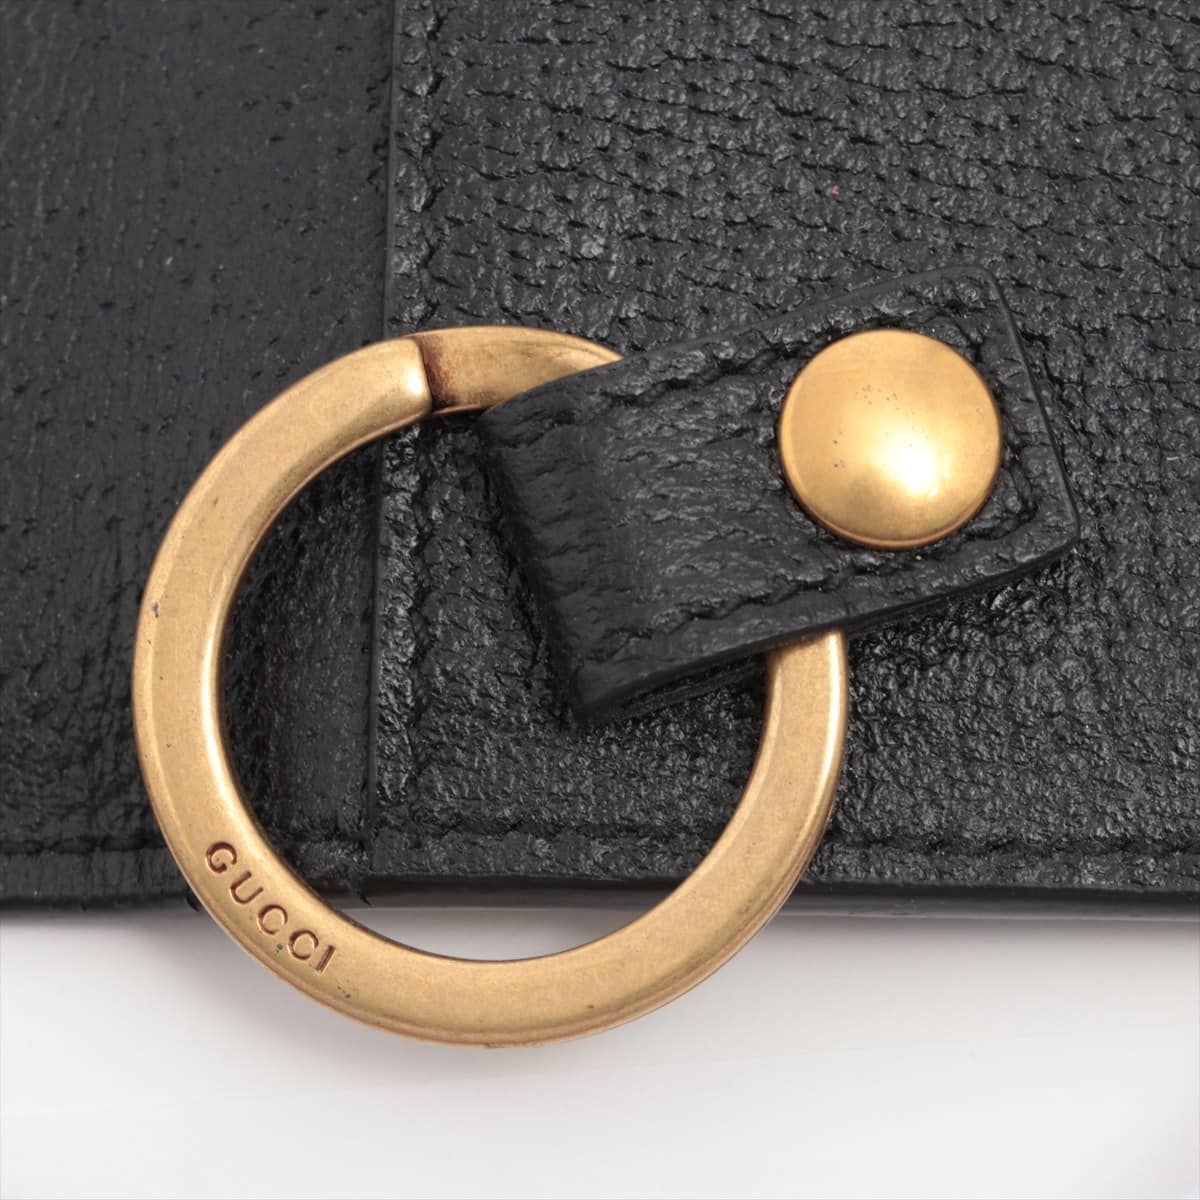 Gucci GG Marmont 435305 Leather Key case Black